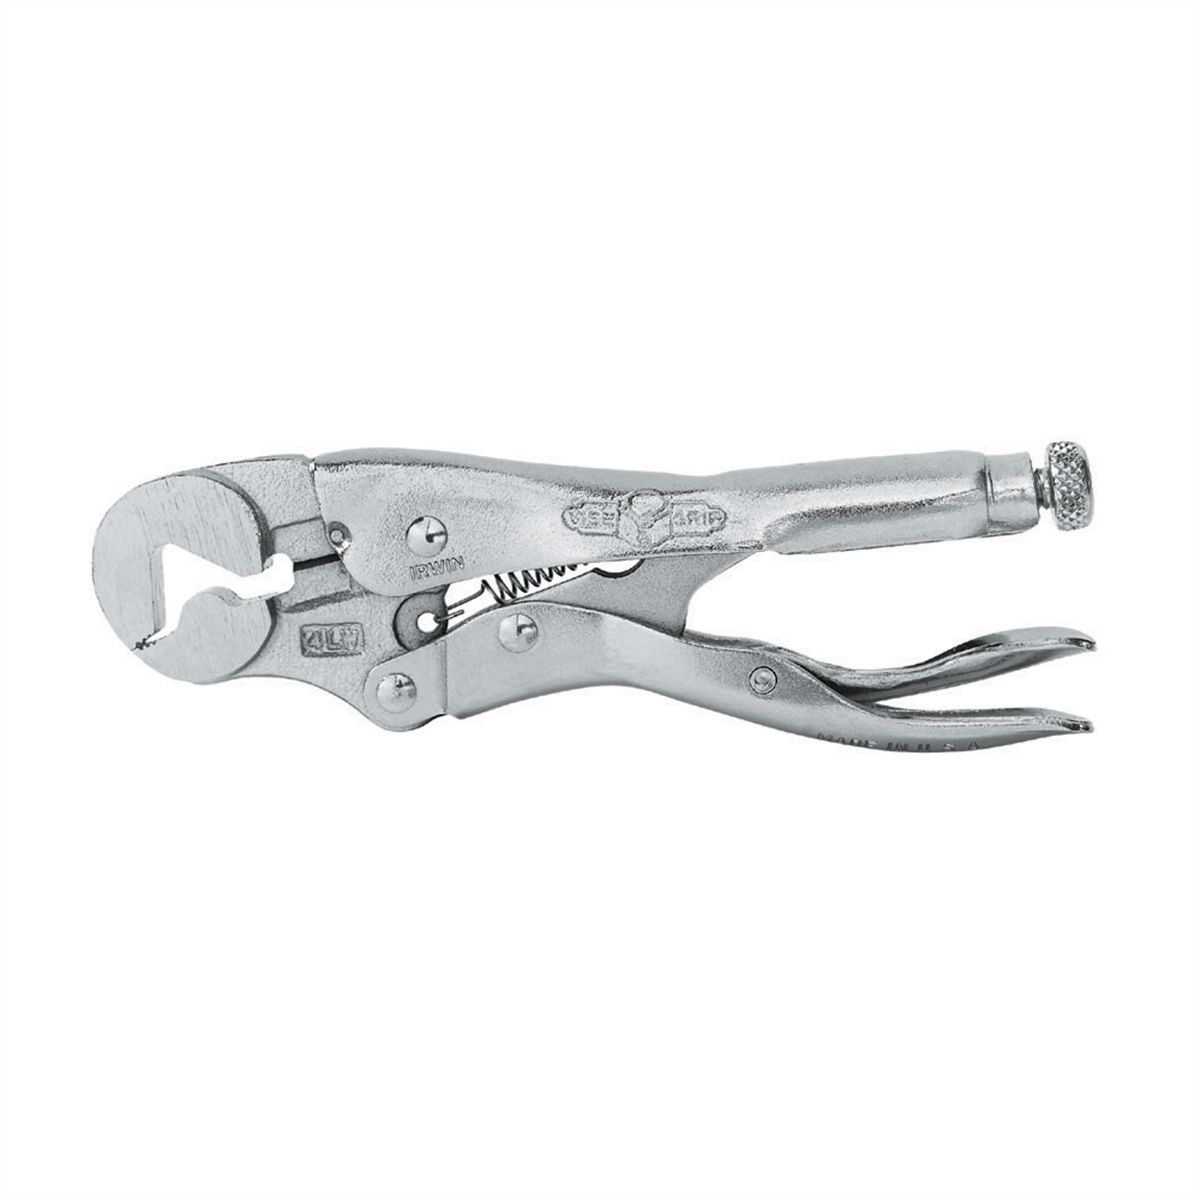 Locking Wrench with Cutter 9/16 Cap, 4 Inch Length